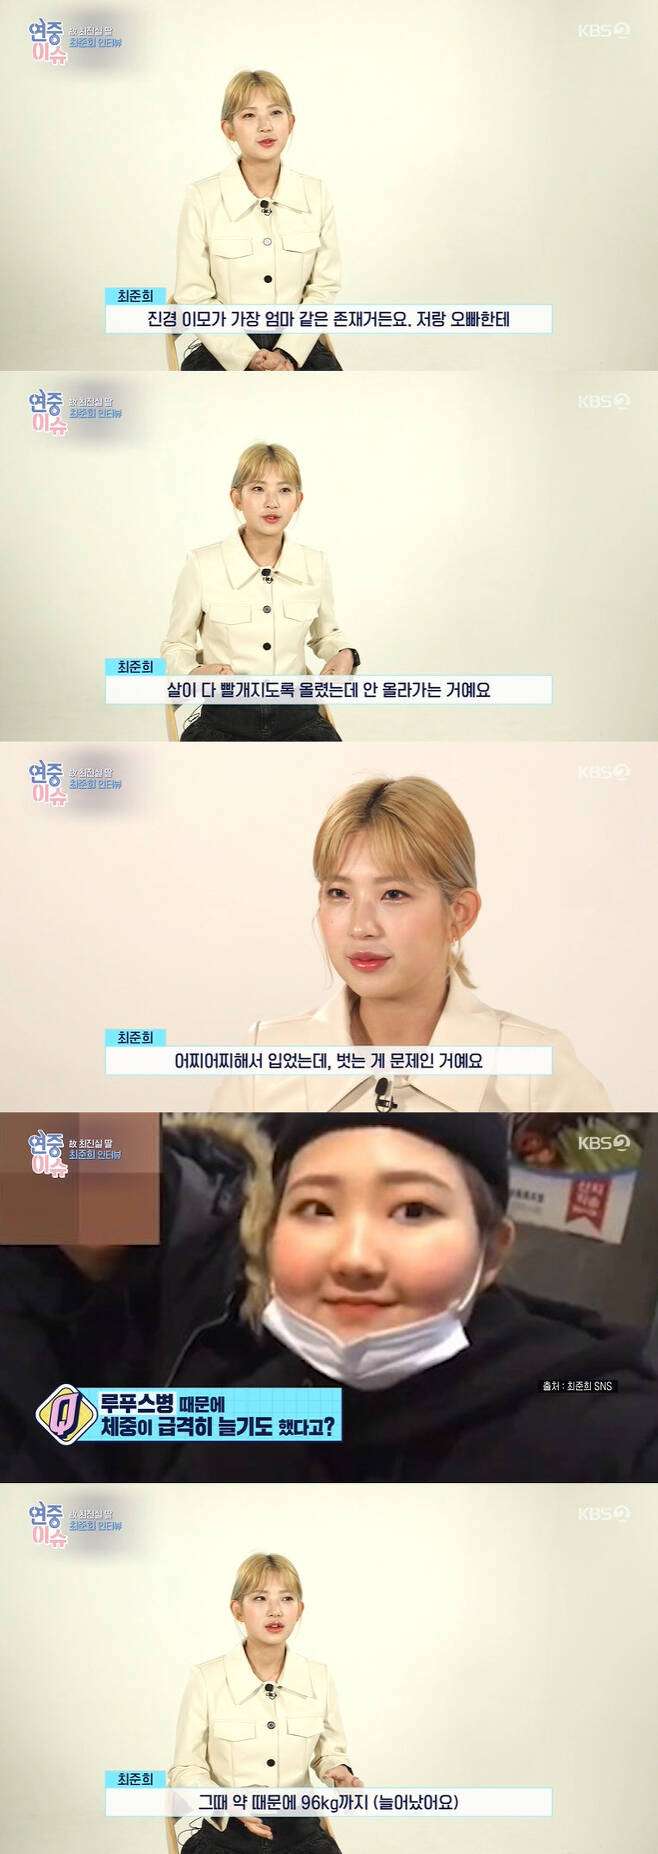 Choi Joon-Hee made his first broadcast appearance after an exclusive contract with Year-round live.In KBS2 Year-round live broadcast on the 11th, an interview with Choi Joon-Hee was released.Choi Joon-Hee, who turned 20 this year.Choi Joon-Hee said frankly about the best thing to be an adult: I can buy pretty drinks that I see every time I enter a convenience store.The most motherly presence for Choi Joon-Hee was Jin-kyeong Hong.Choi Joon-Hee said, Jin Kyung is the most mother-like person to me and my brother. He said, I am 20 years old and I want to be Jun-hee who can cope more maturely and live.He says he prays for me every day, said Jin-kyeong Hong.Choi Joon-Hee, who battled lupus disease, lost as much as 44kg from 96kg weight; there was a decisive occasion when Choi Joon-Hee decided to go on a diet.Choi Joon-Hee said, I put up my clothes to make my flesh red, but I did not go up. I did not get stripped.I first got lupus disease in my third year of junior high school, and it has no cure concept. I ate a lot because of the side effects of the drug, and it was 96kg, he said.Choi Joon-Hees future moves are also drawing everyones attention.Choi Joon-Hee, who recently signed an exclusive contract with his agency, said, I think that my daughter is acting because of my mother, but I am not sure about myself. I am twenty years old and I still want to do it.The versatile Choi Joon-Hee is about to publish an essay recently: The book contains the life of Choi Joon-Hee.Choi Joon-Hee said, I have not lived a long life so far, but I think I have experienced a lot of things like movies for 20 years.I am preparing a prose book about what I felt through those things, and the point of time. Choi Joon-Hee, whose every move became a hot topic, was burdened by public interest.Choi Joon-Hee, who is envious of ordinary friends, said, I was so angry that it was not an exaggeration to say that my mother gave birth and the public raised it.I look forward to my mothers share and look at me with a lot of love-filled eyes. My brother and I plan to live nicely enough to say, My children are cool even if I have them when my uncle sees me in the sky.I hope you will continue to support me in the future. 